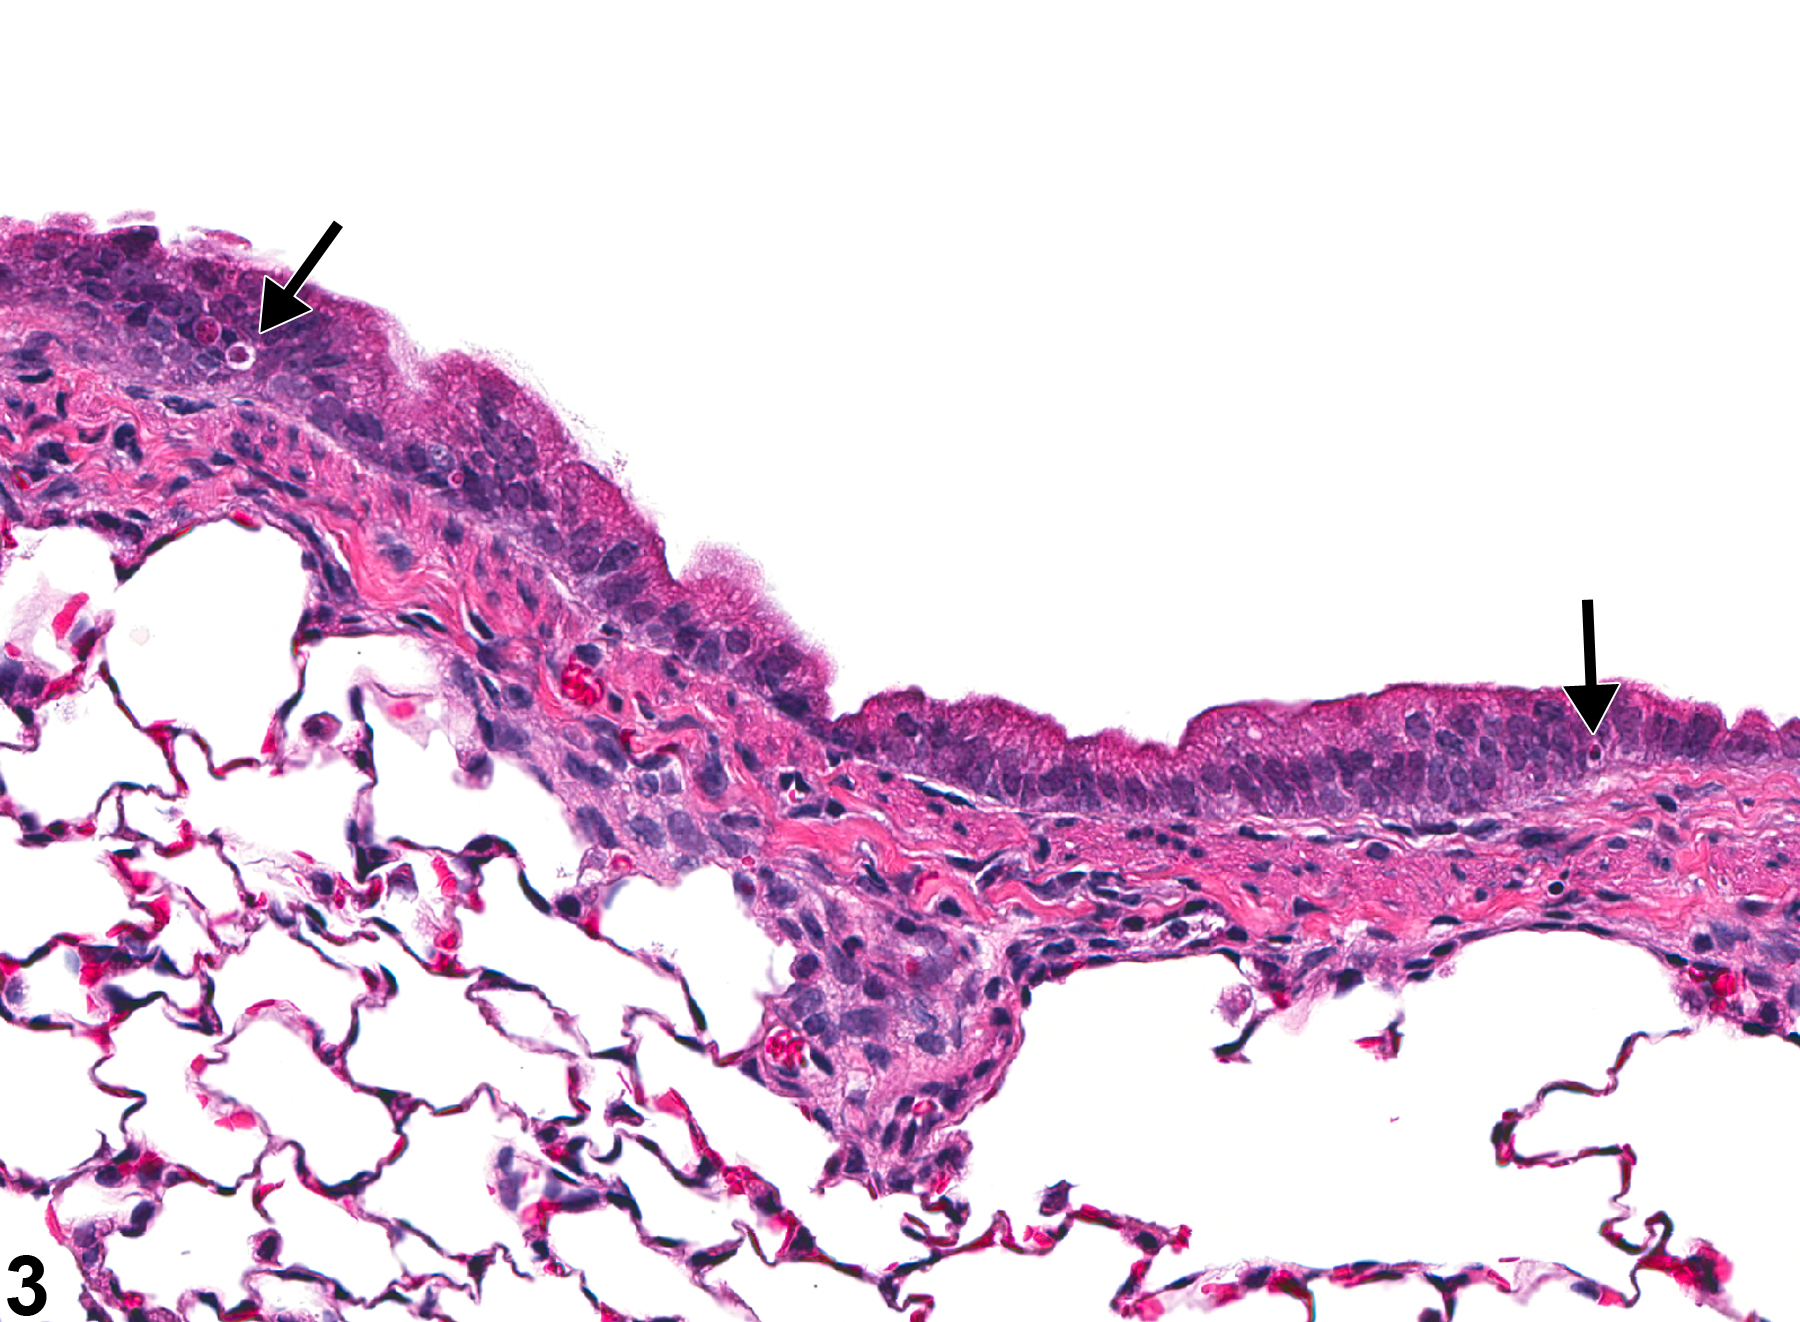 Image of bronchiolar regeneration in the lung from a male Wistar Han rat in a acute study